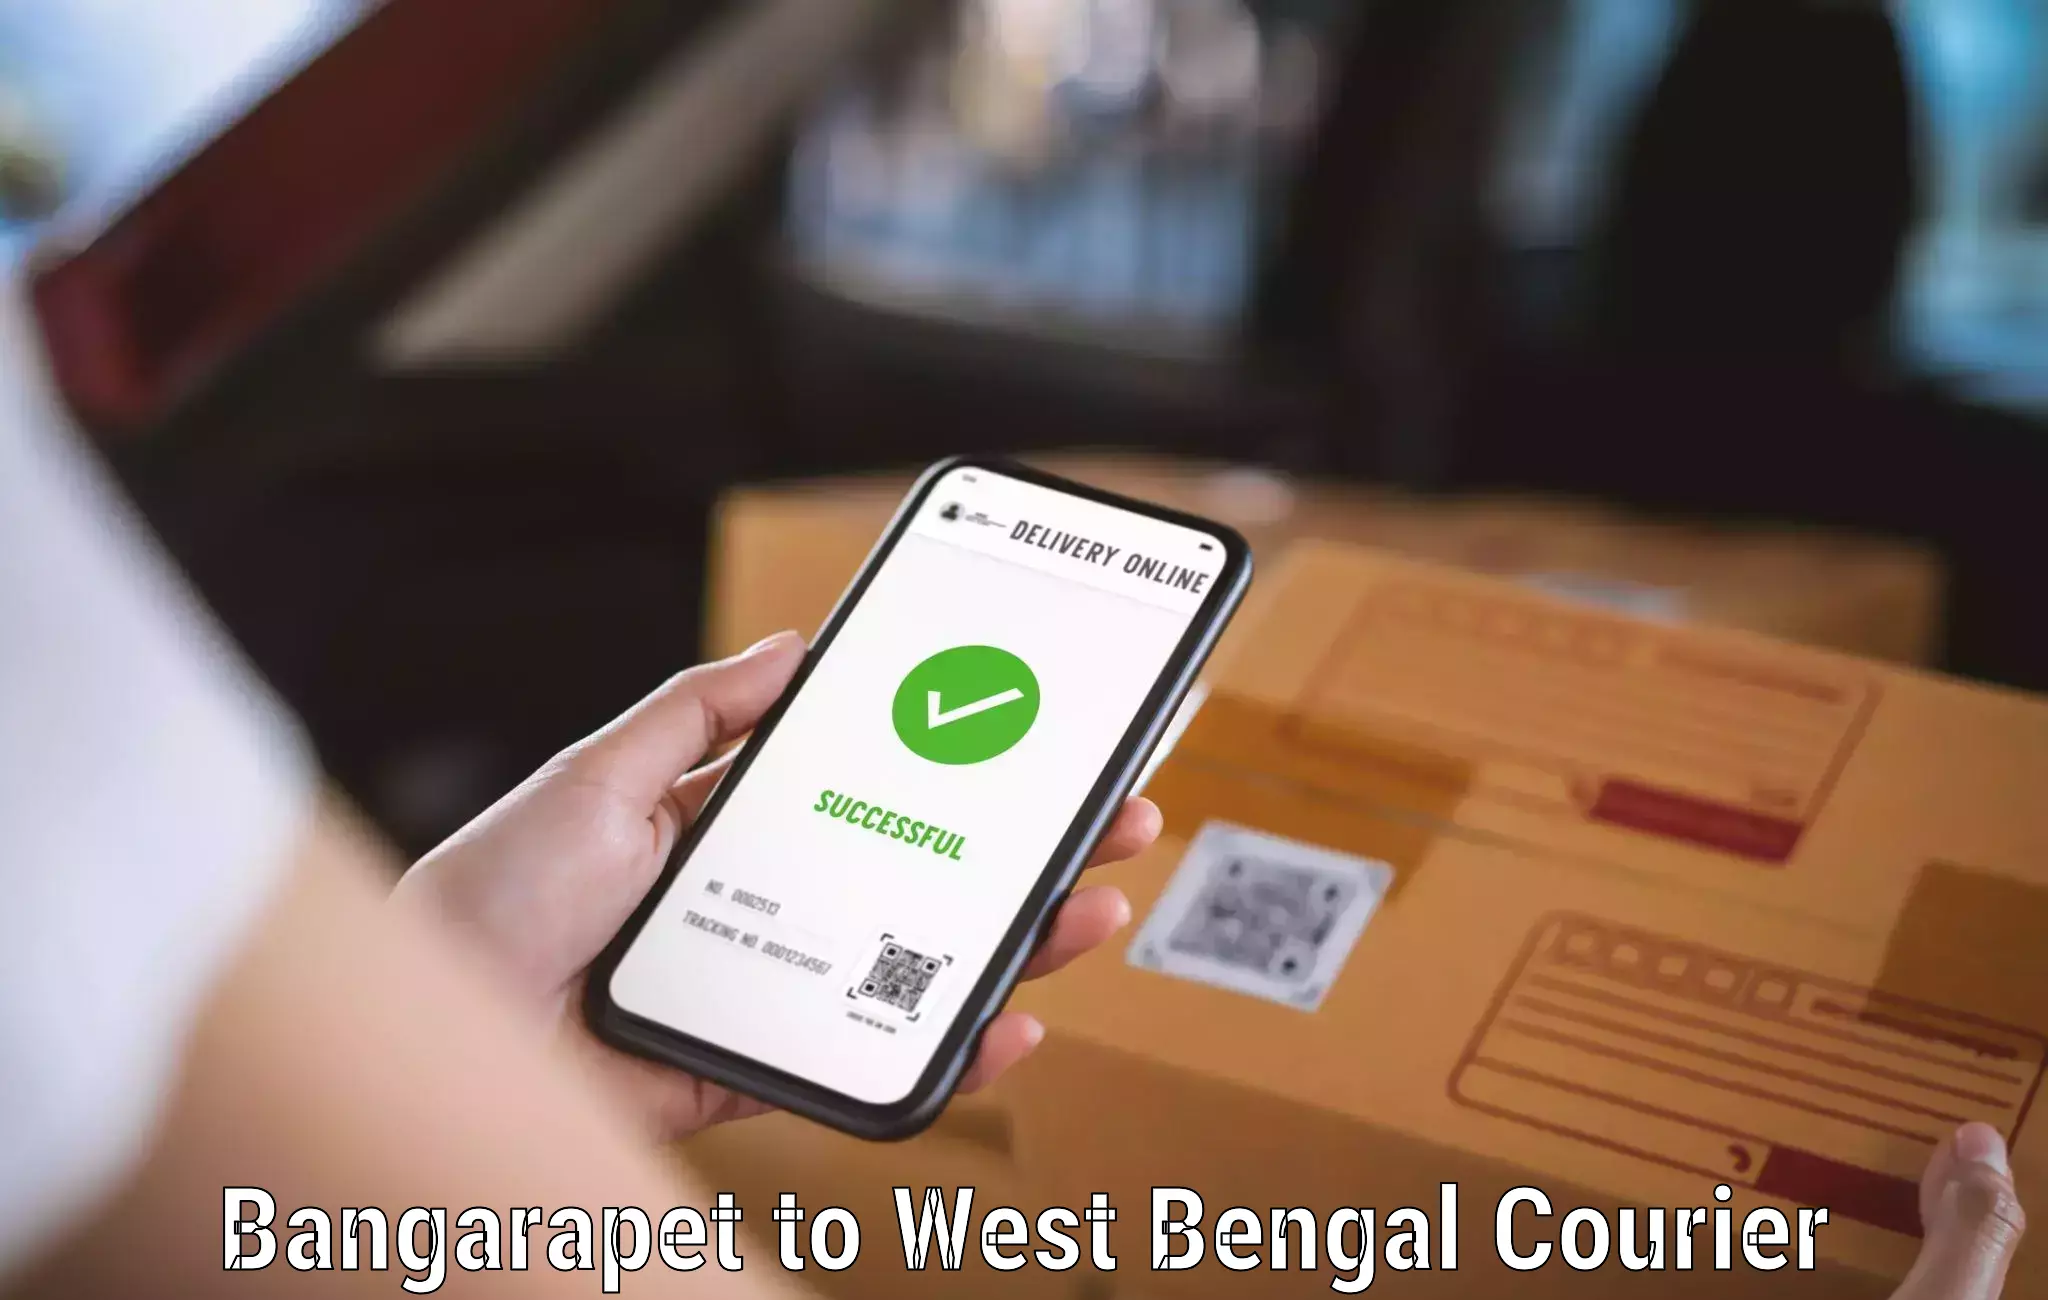 State-of-the-art courier technology Bangarapet to West Bengal